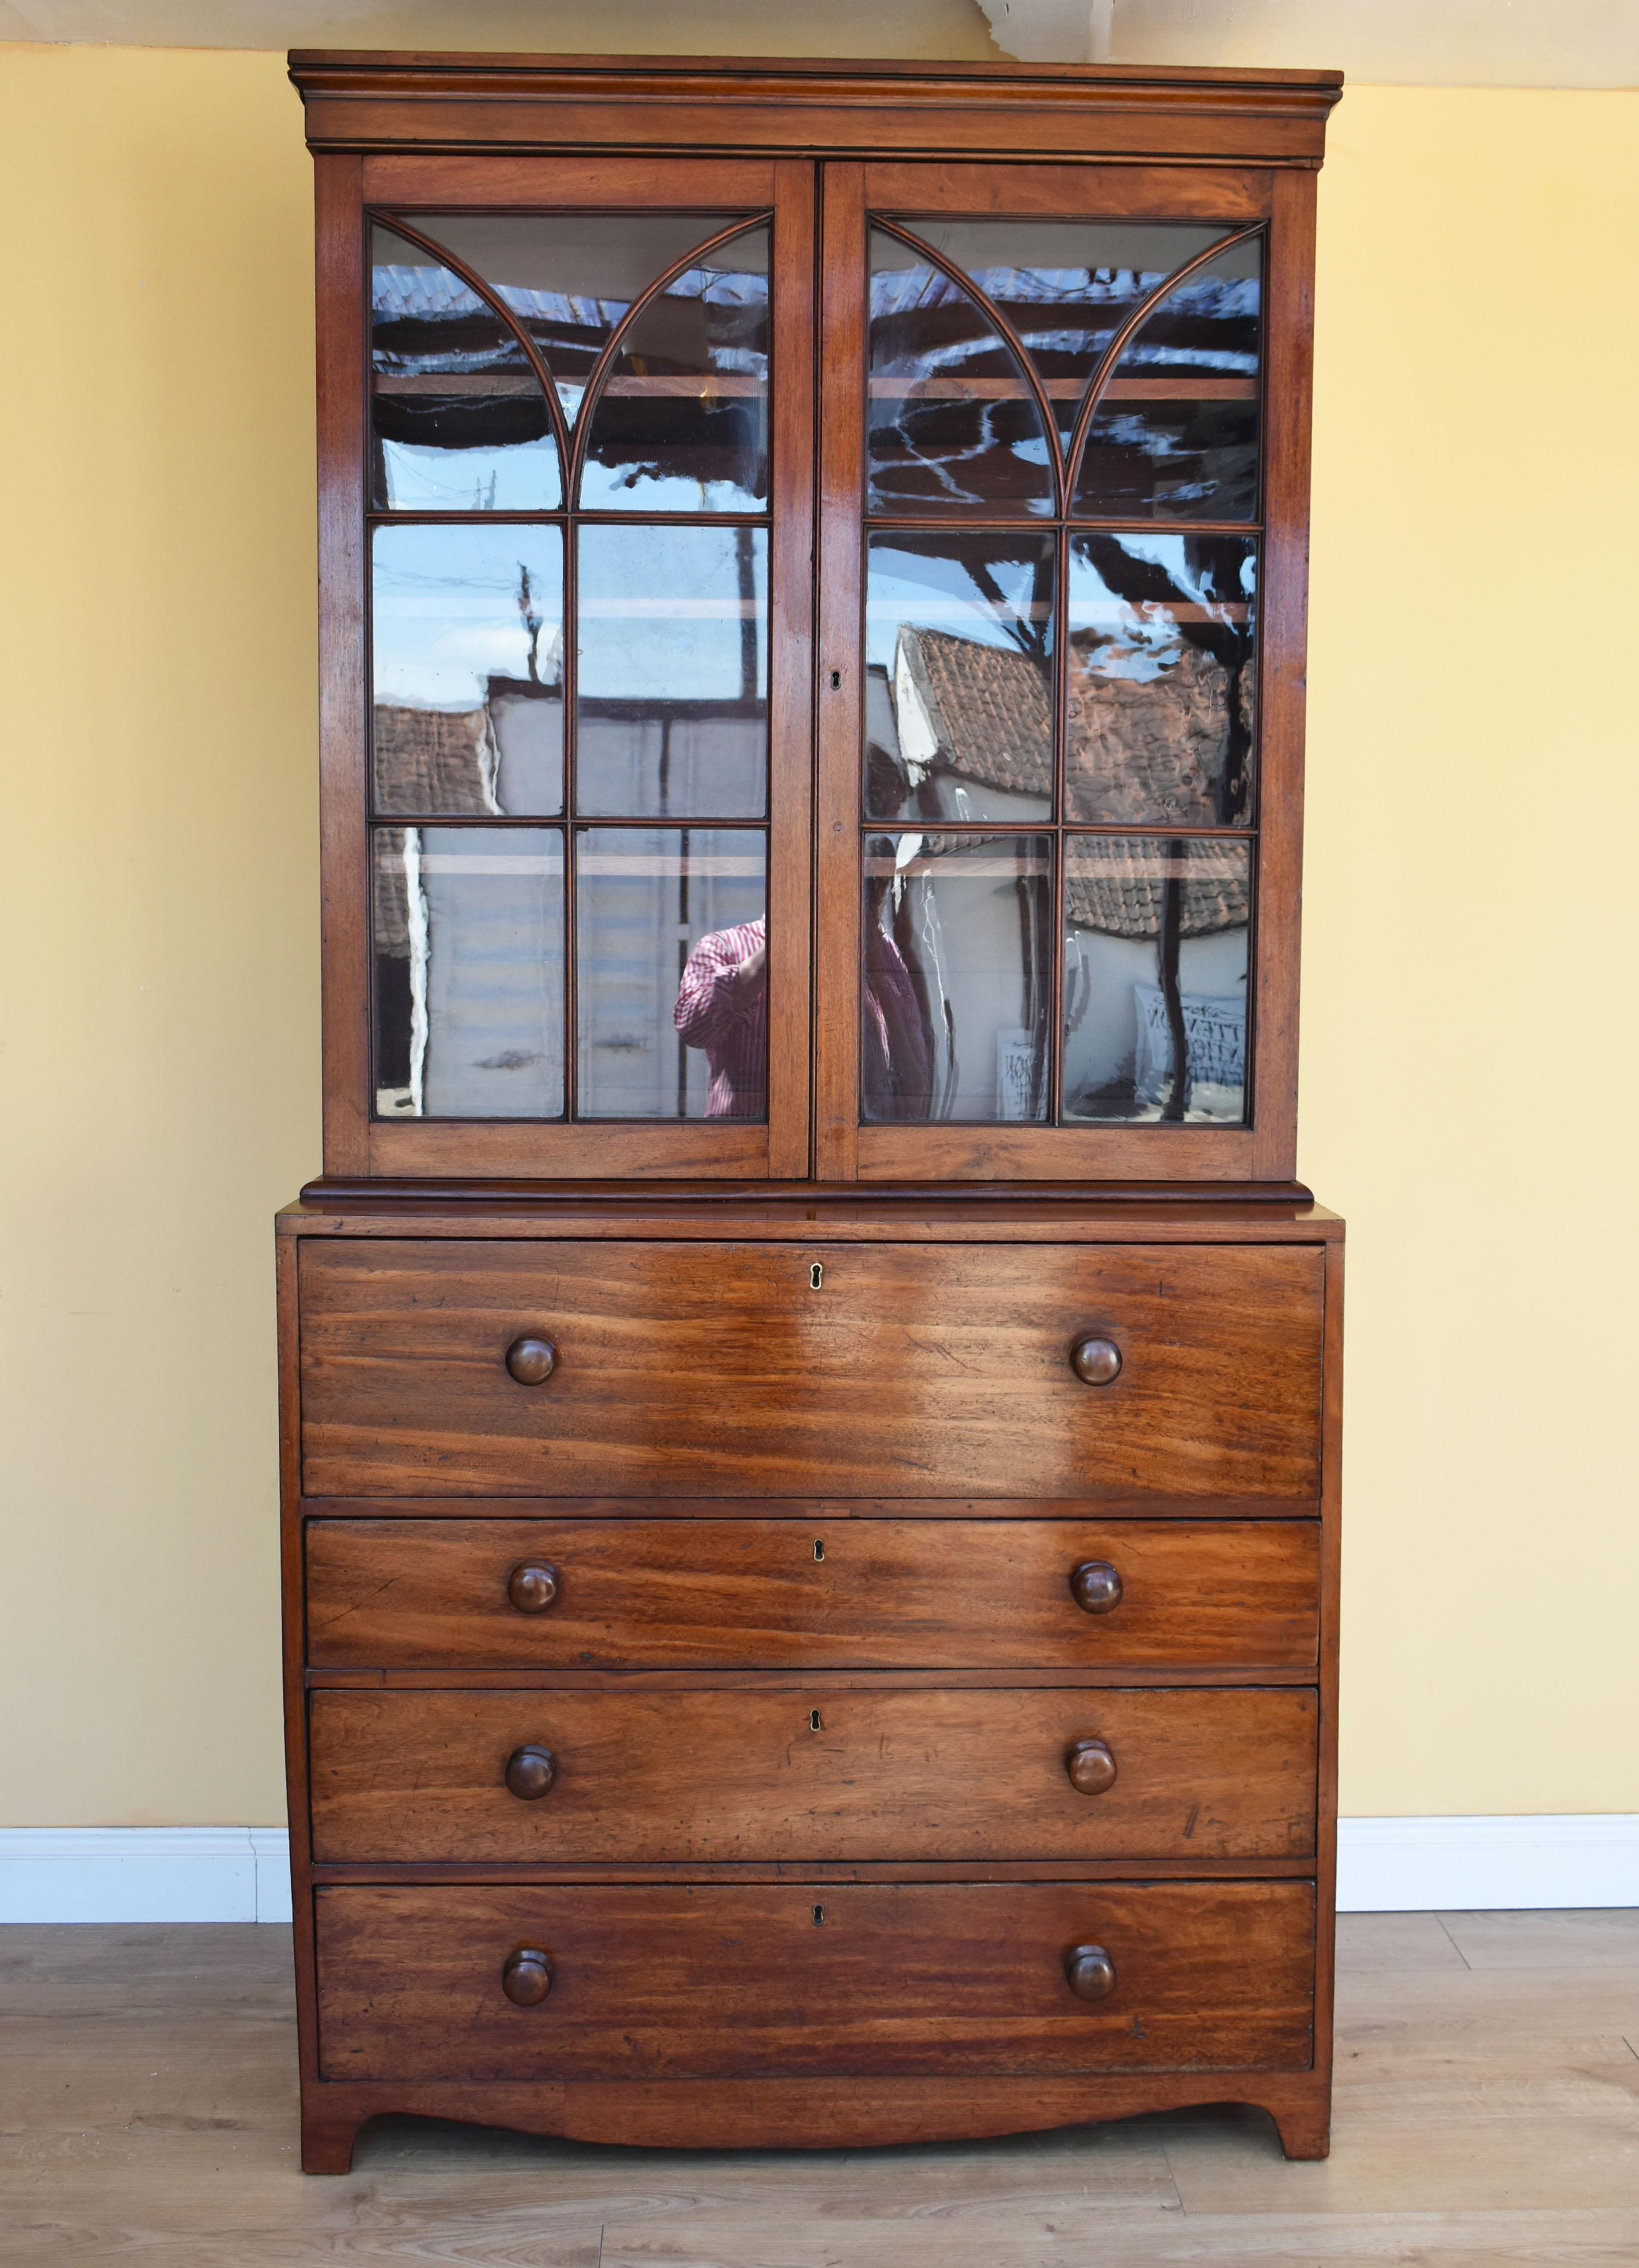 For sale is a good quality George III mahogany secretaire bookcase. The top of the bookcase has two glazed doors opening to reveal three adjustable shelves. Below this, is a secretaire drawer with a fall front, revealing a fitted interior comprising